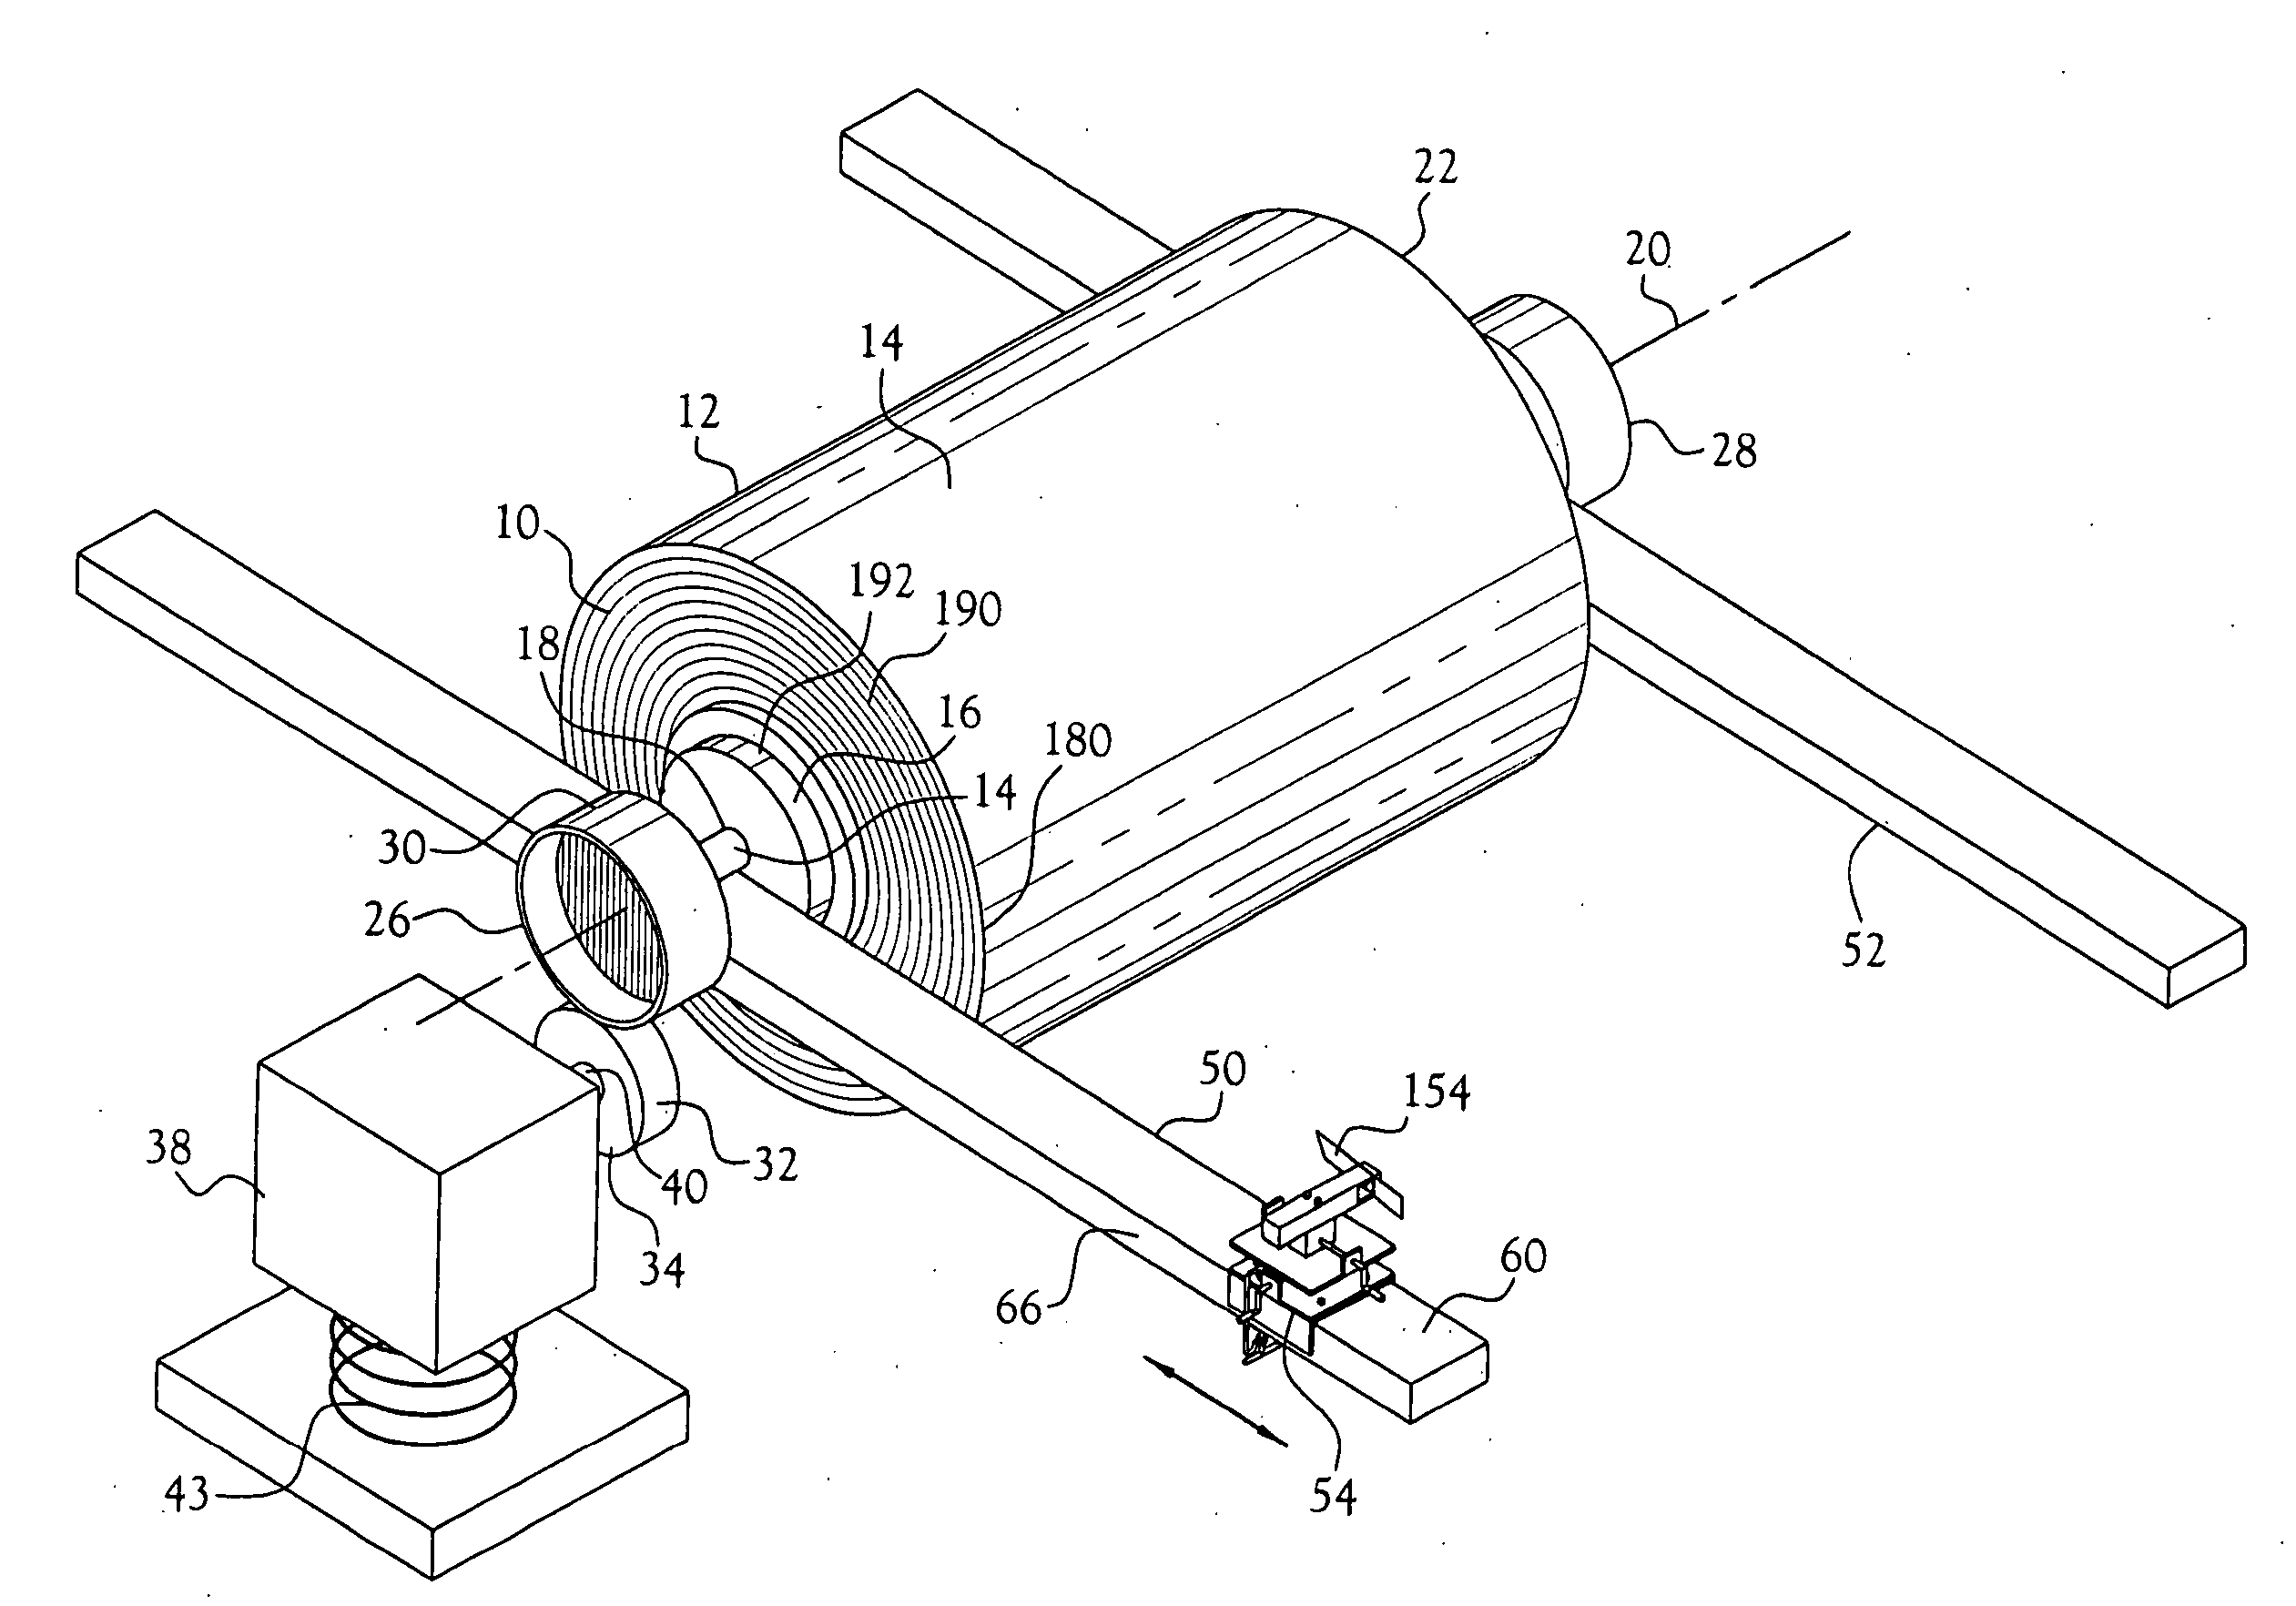 Paper roll edge trimming method and apparatus